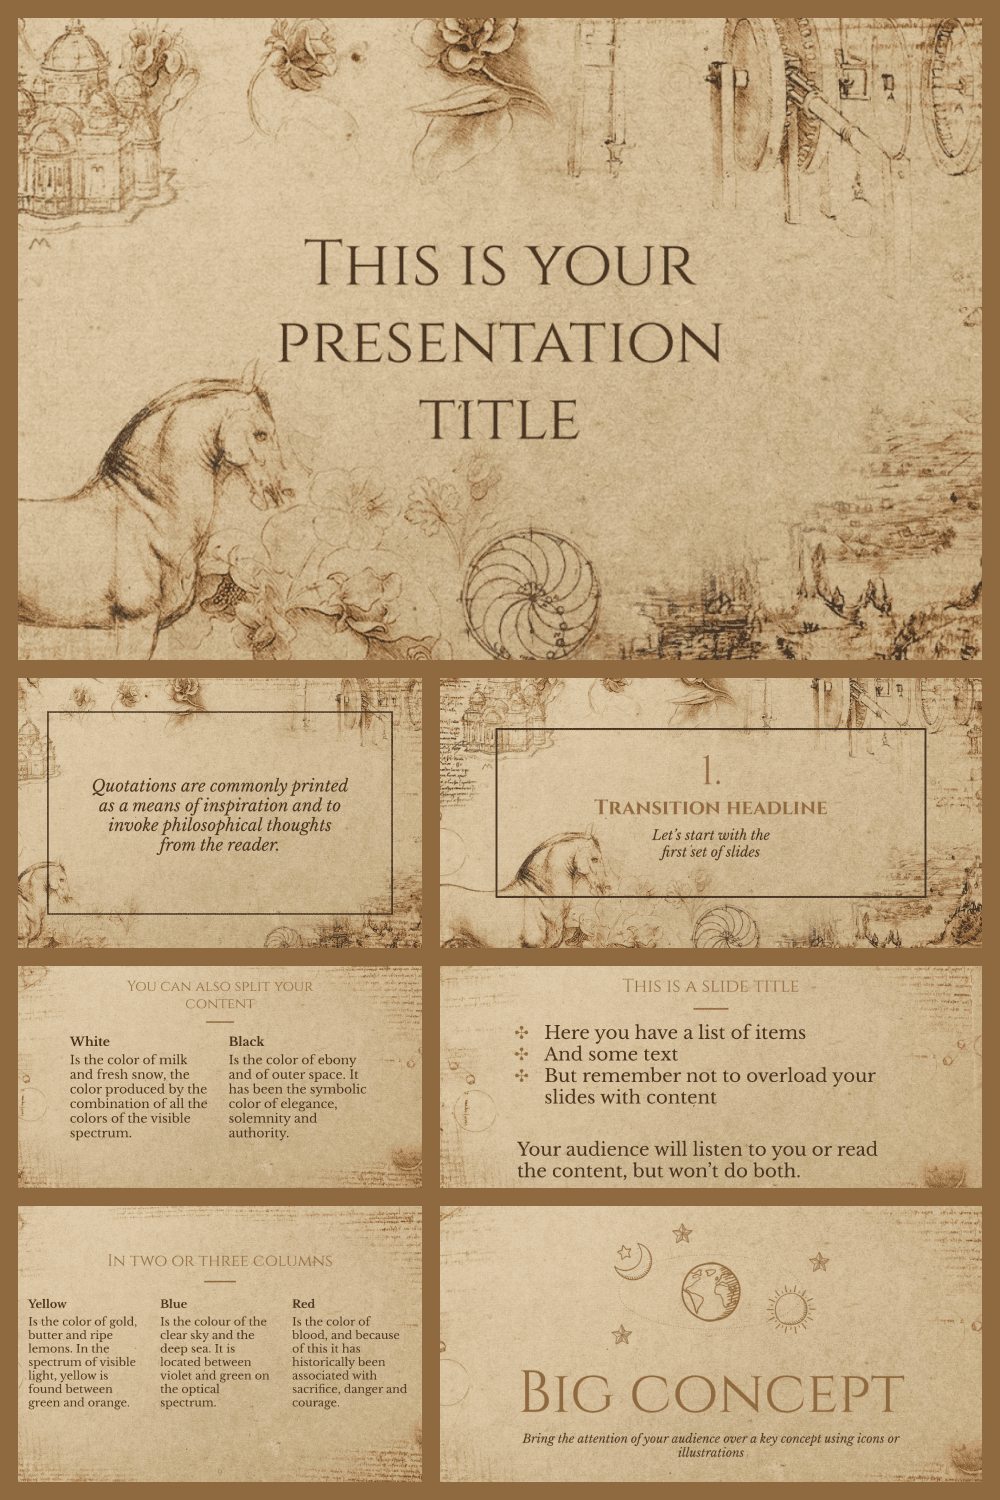 This free presentation template uses a textured paper background, Leonardo Da Vinci’s drawings and classic typography to convey a historical feeling.